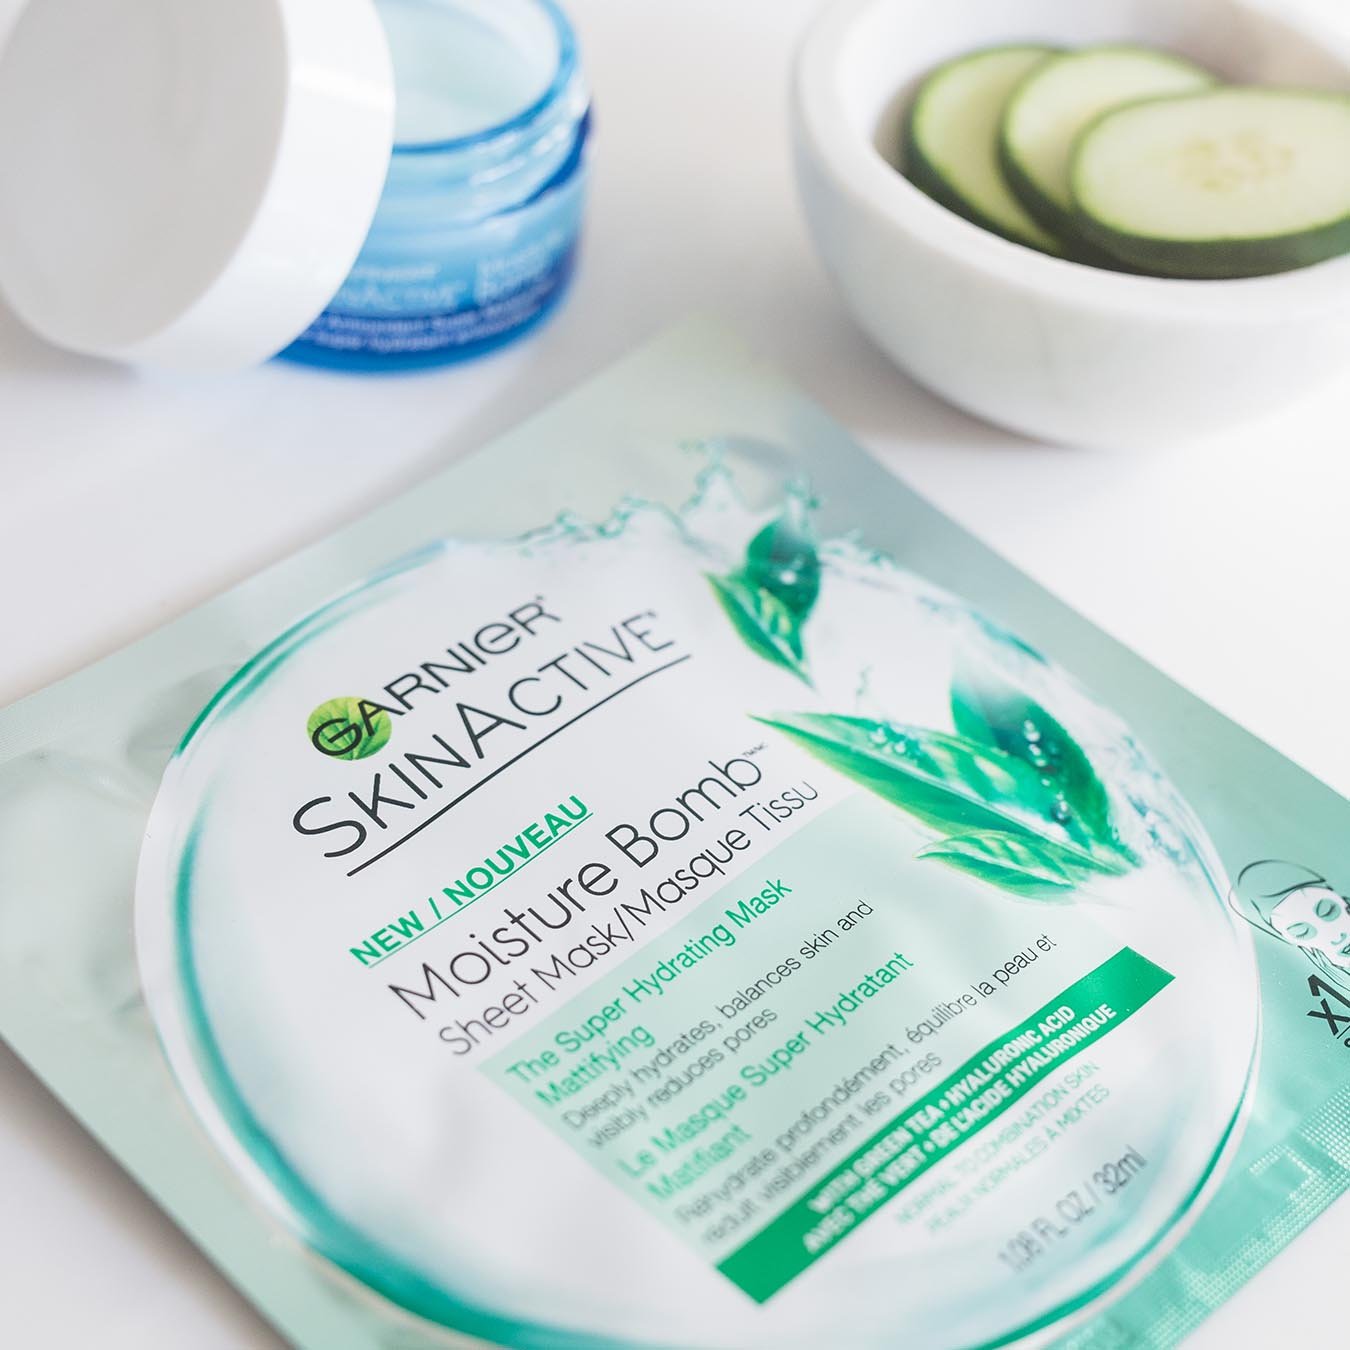 Garnier SkinActive Moisture Bomb Sheet Mask with Green Tea on a white table with SkinActive Antioxidant Super Moisturizer ajar and white marble bowl of sliced cucumbers.